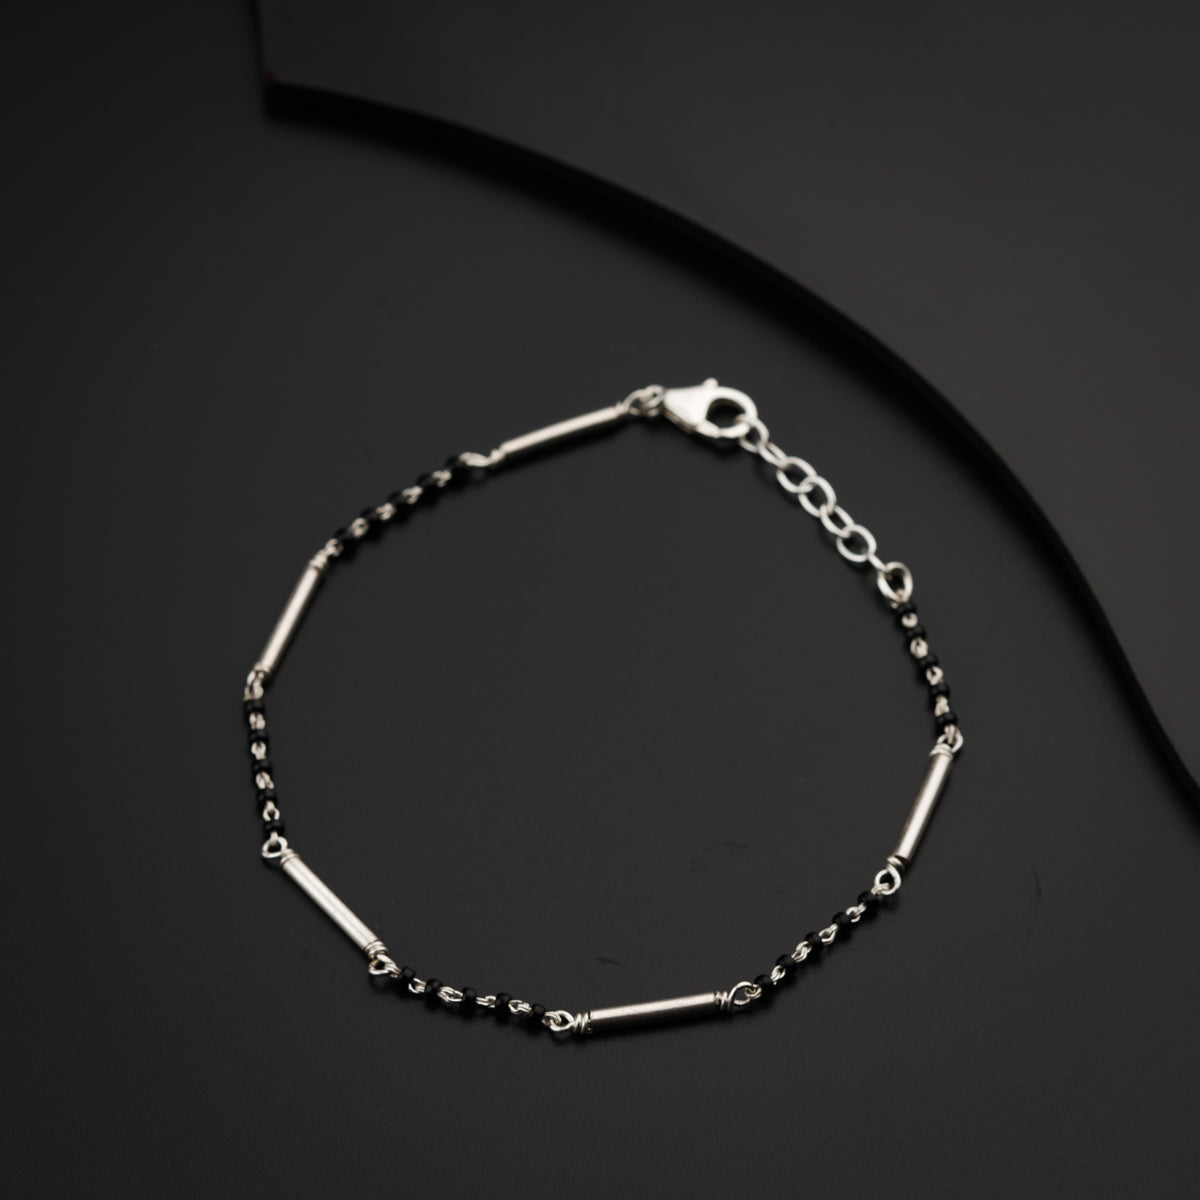 Handmade Silver Mangalsutra Bracelet with Pipe and Black Spinel